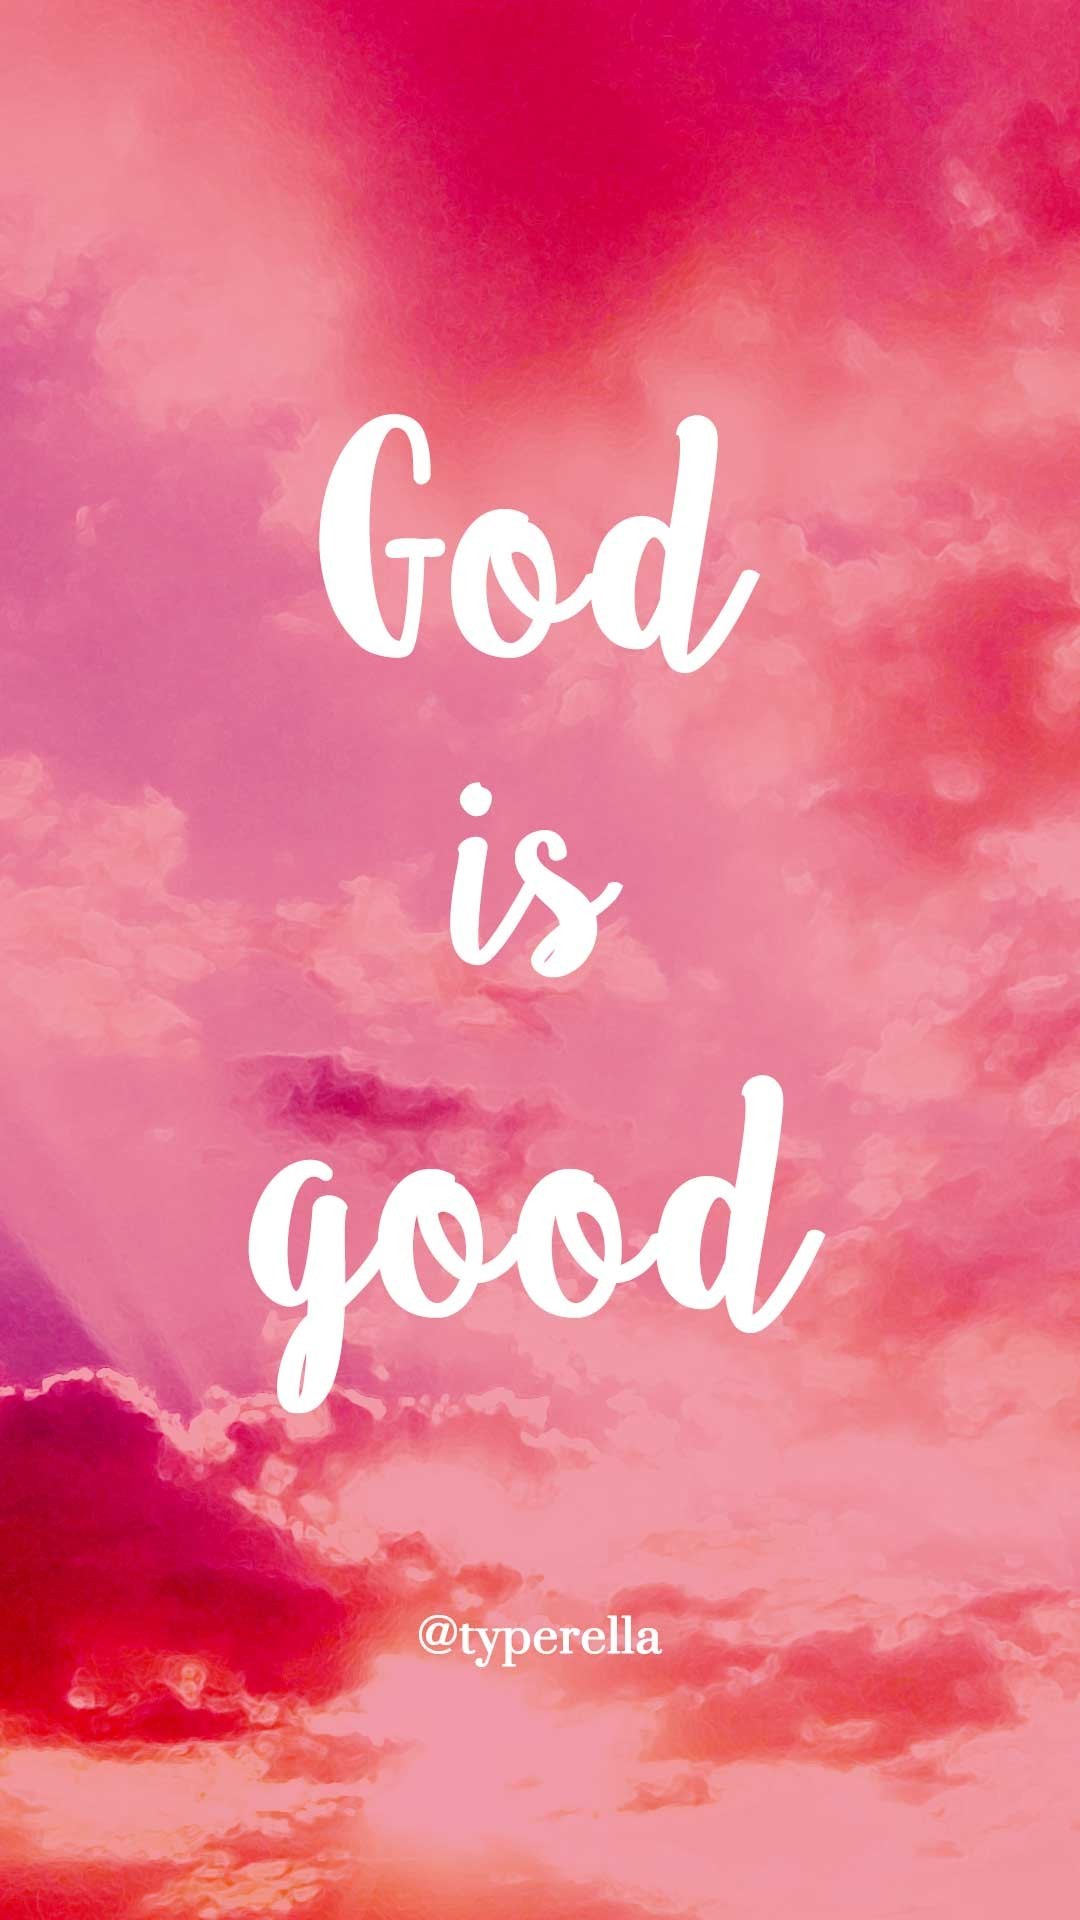 1080x1920, Catholic Wallpaper Best Of Phone Wallpapers - God Is Good Wallpaper Iphone - HD Wallpaper 